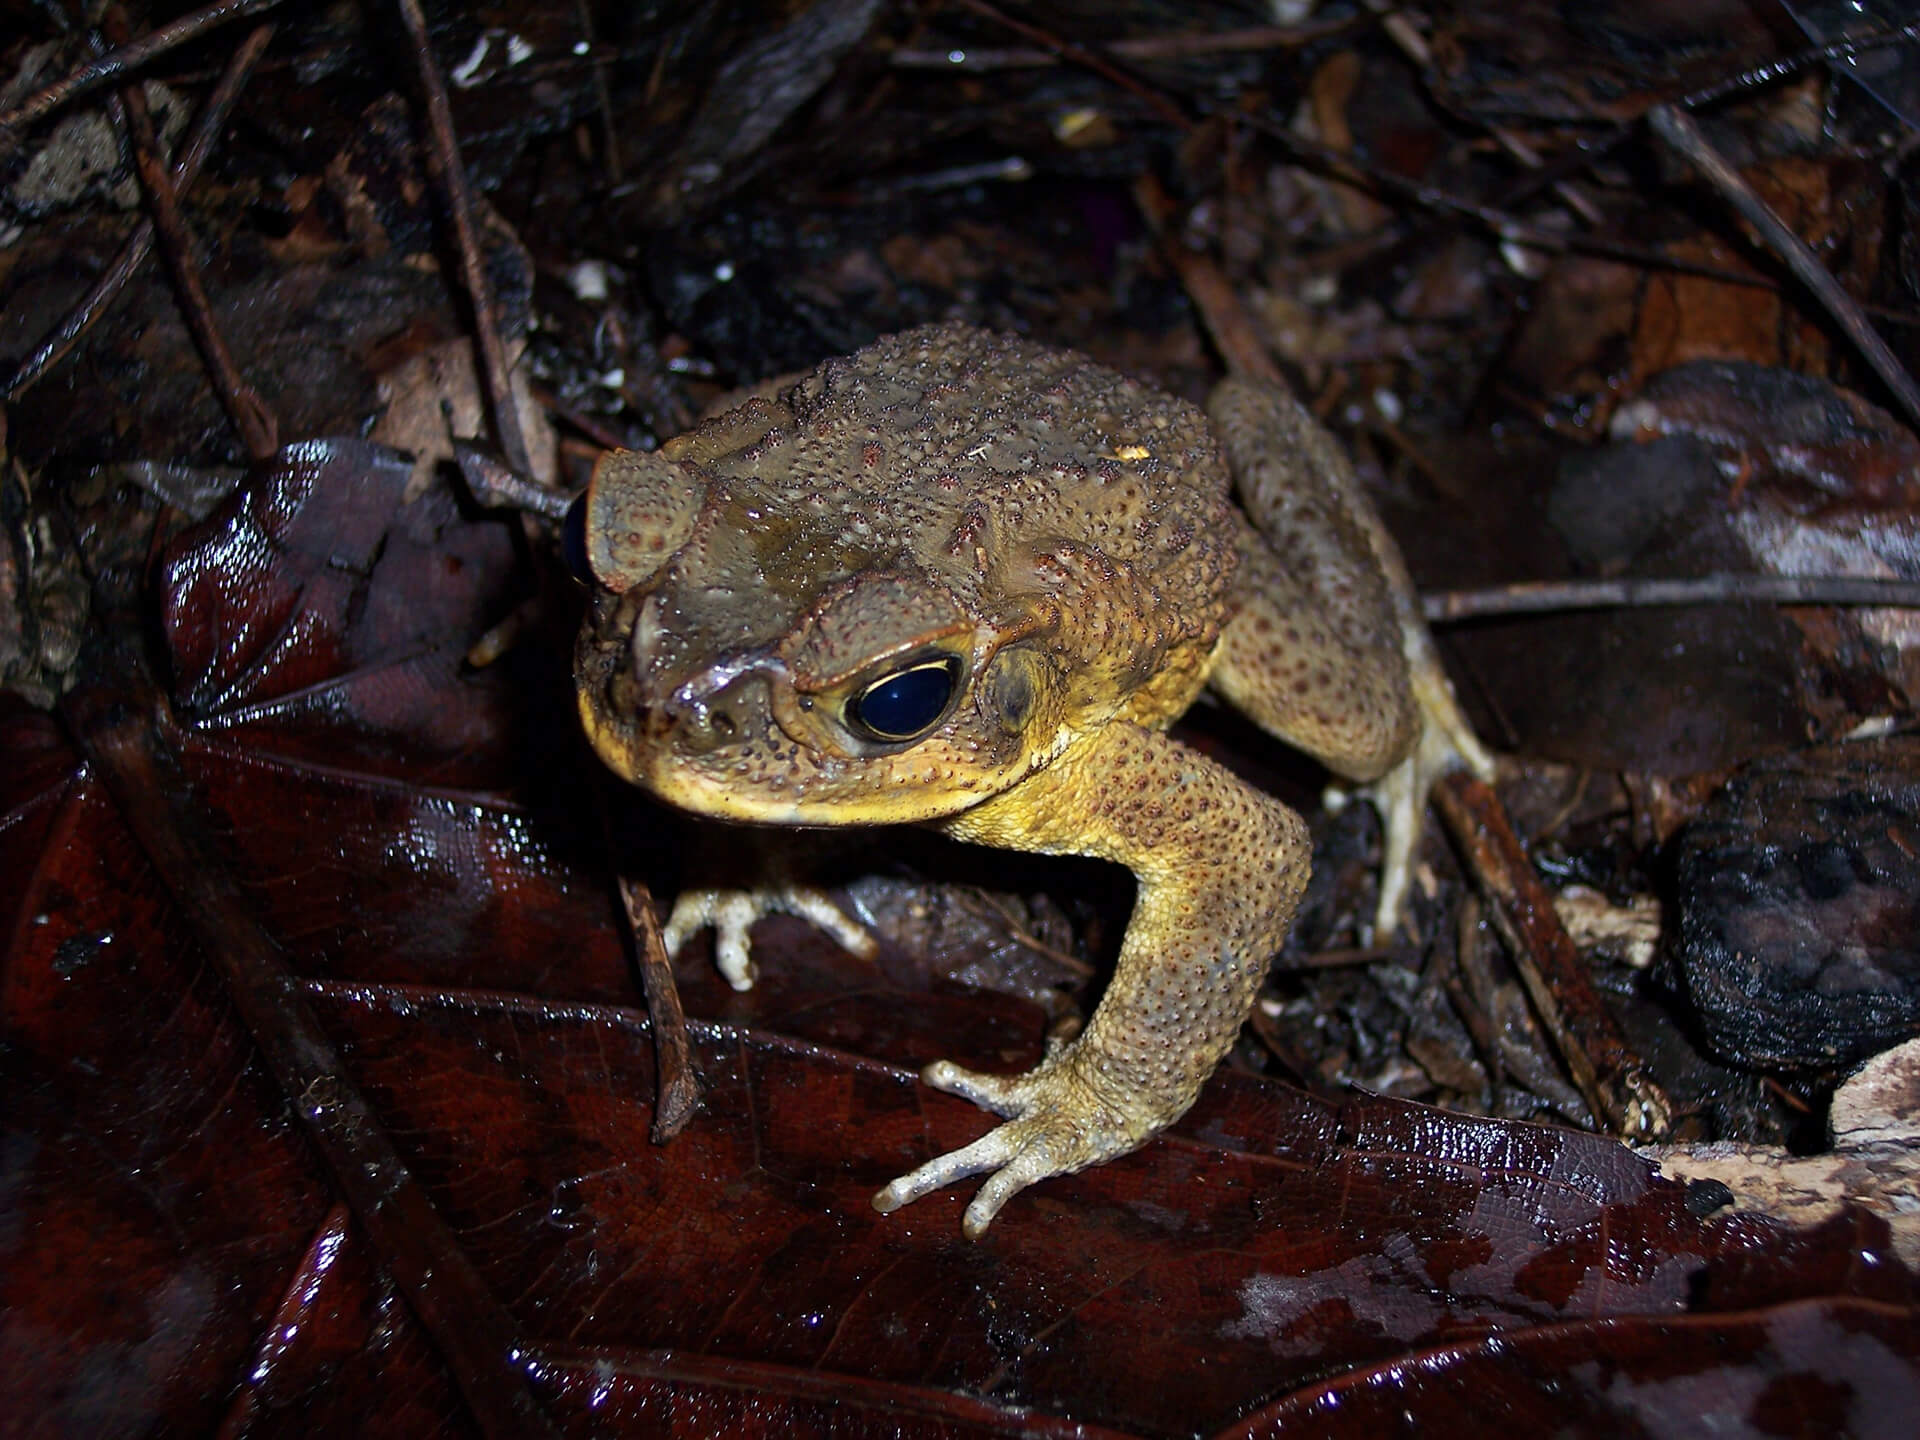 Cane toads have a detrimental impact on native species and are responsible for some being declared endangered.